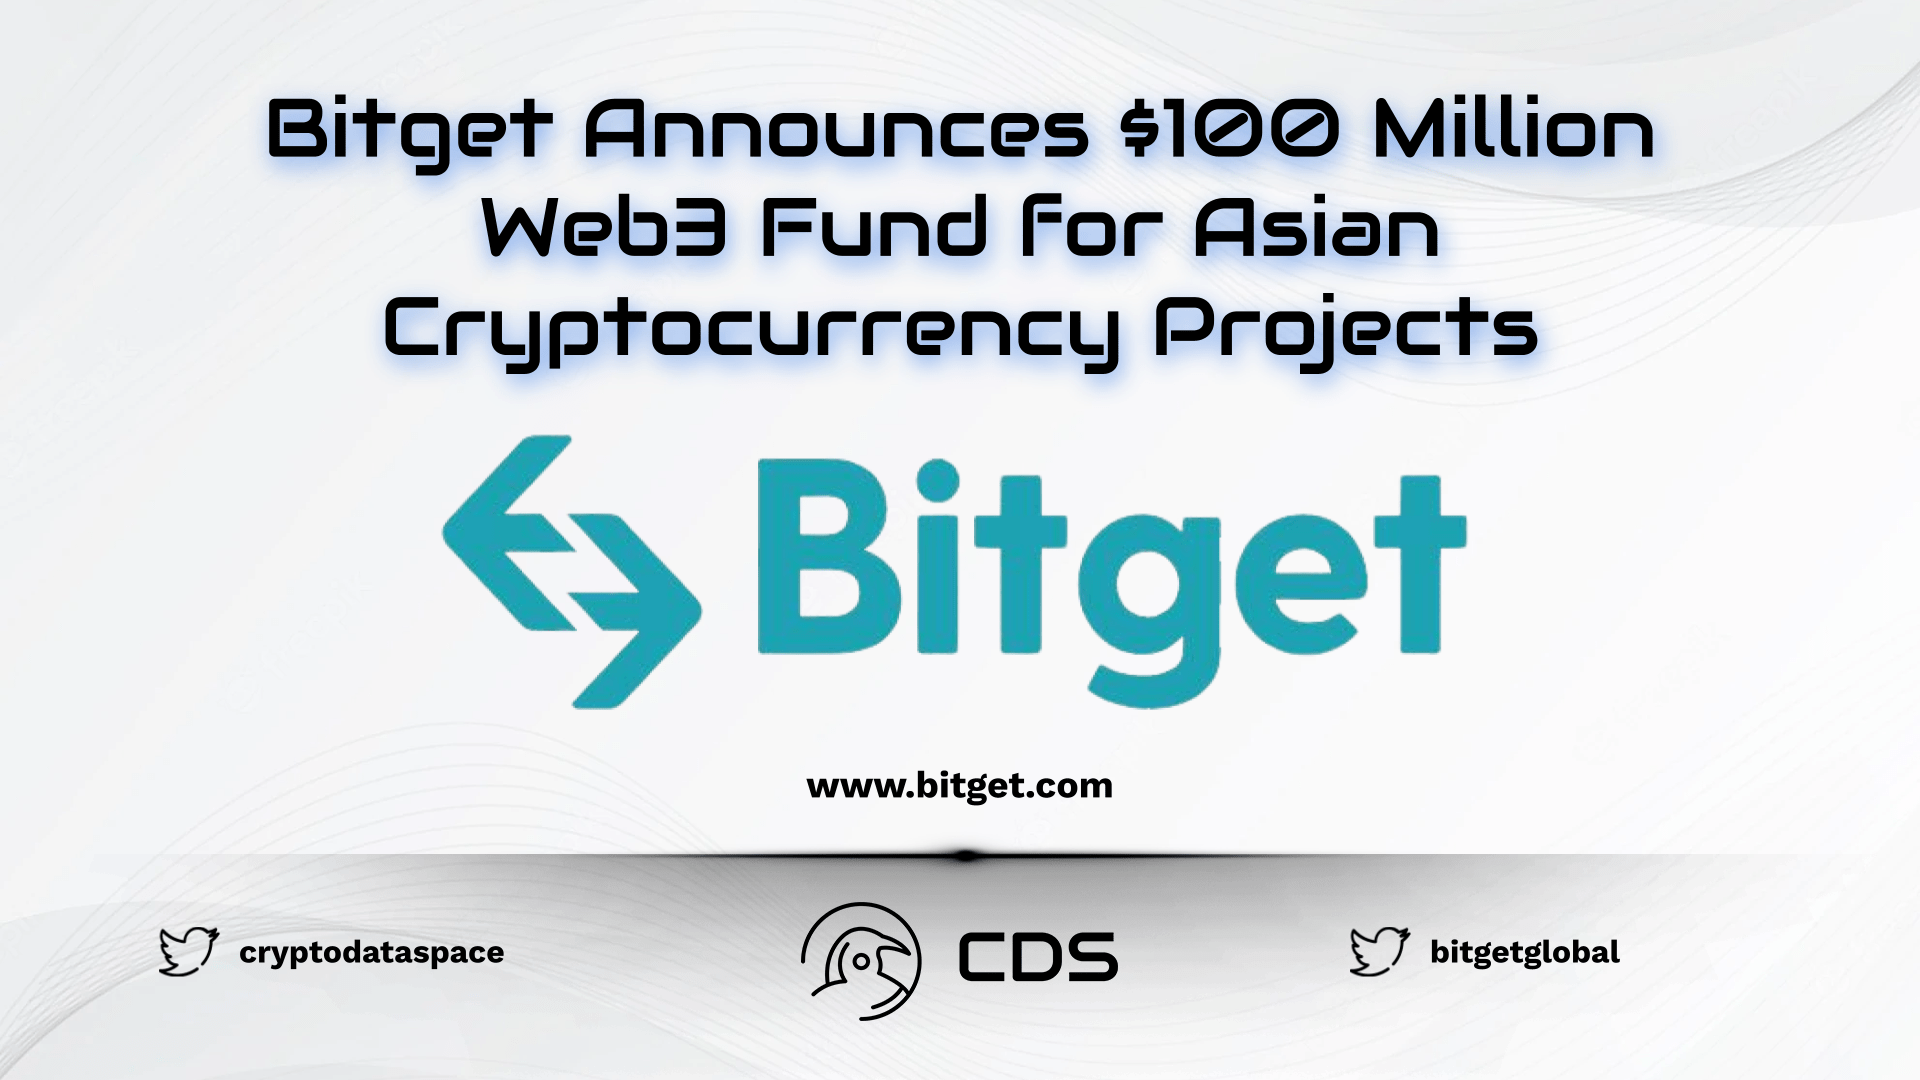 Bitget Announces $100 Million Web3 Fund for Asian Cryptocurrency Projects